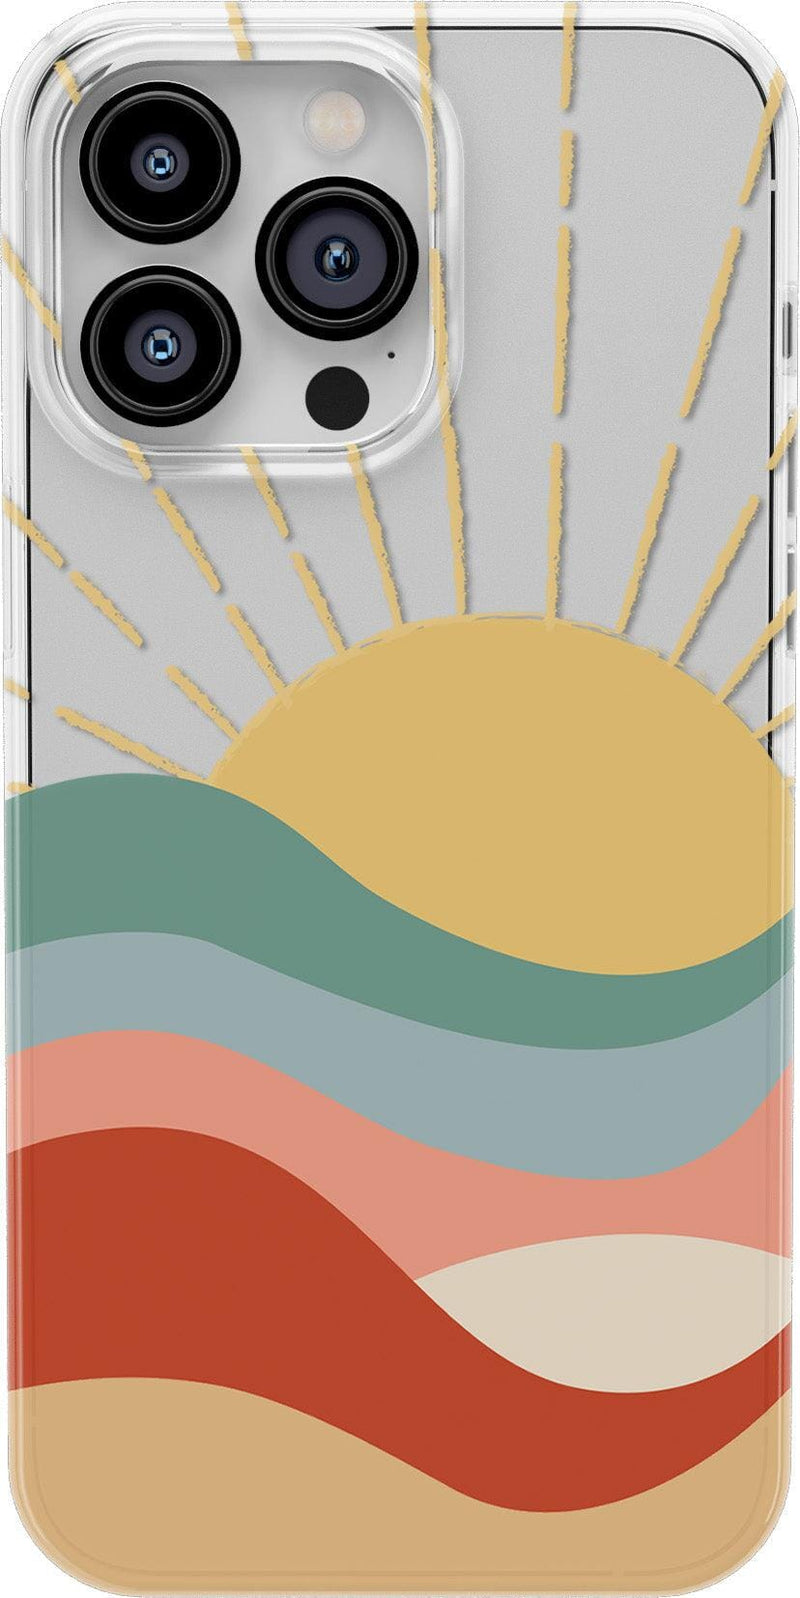 Here Comes the Sun | Colorblock Sunset Case iPhone Case get.casely Classic iPhone 12 Pro